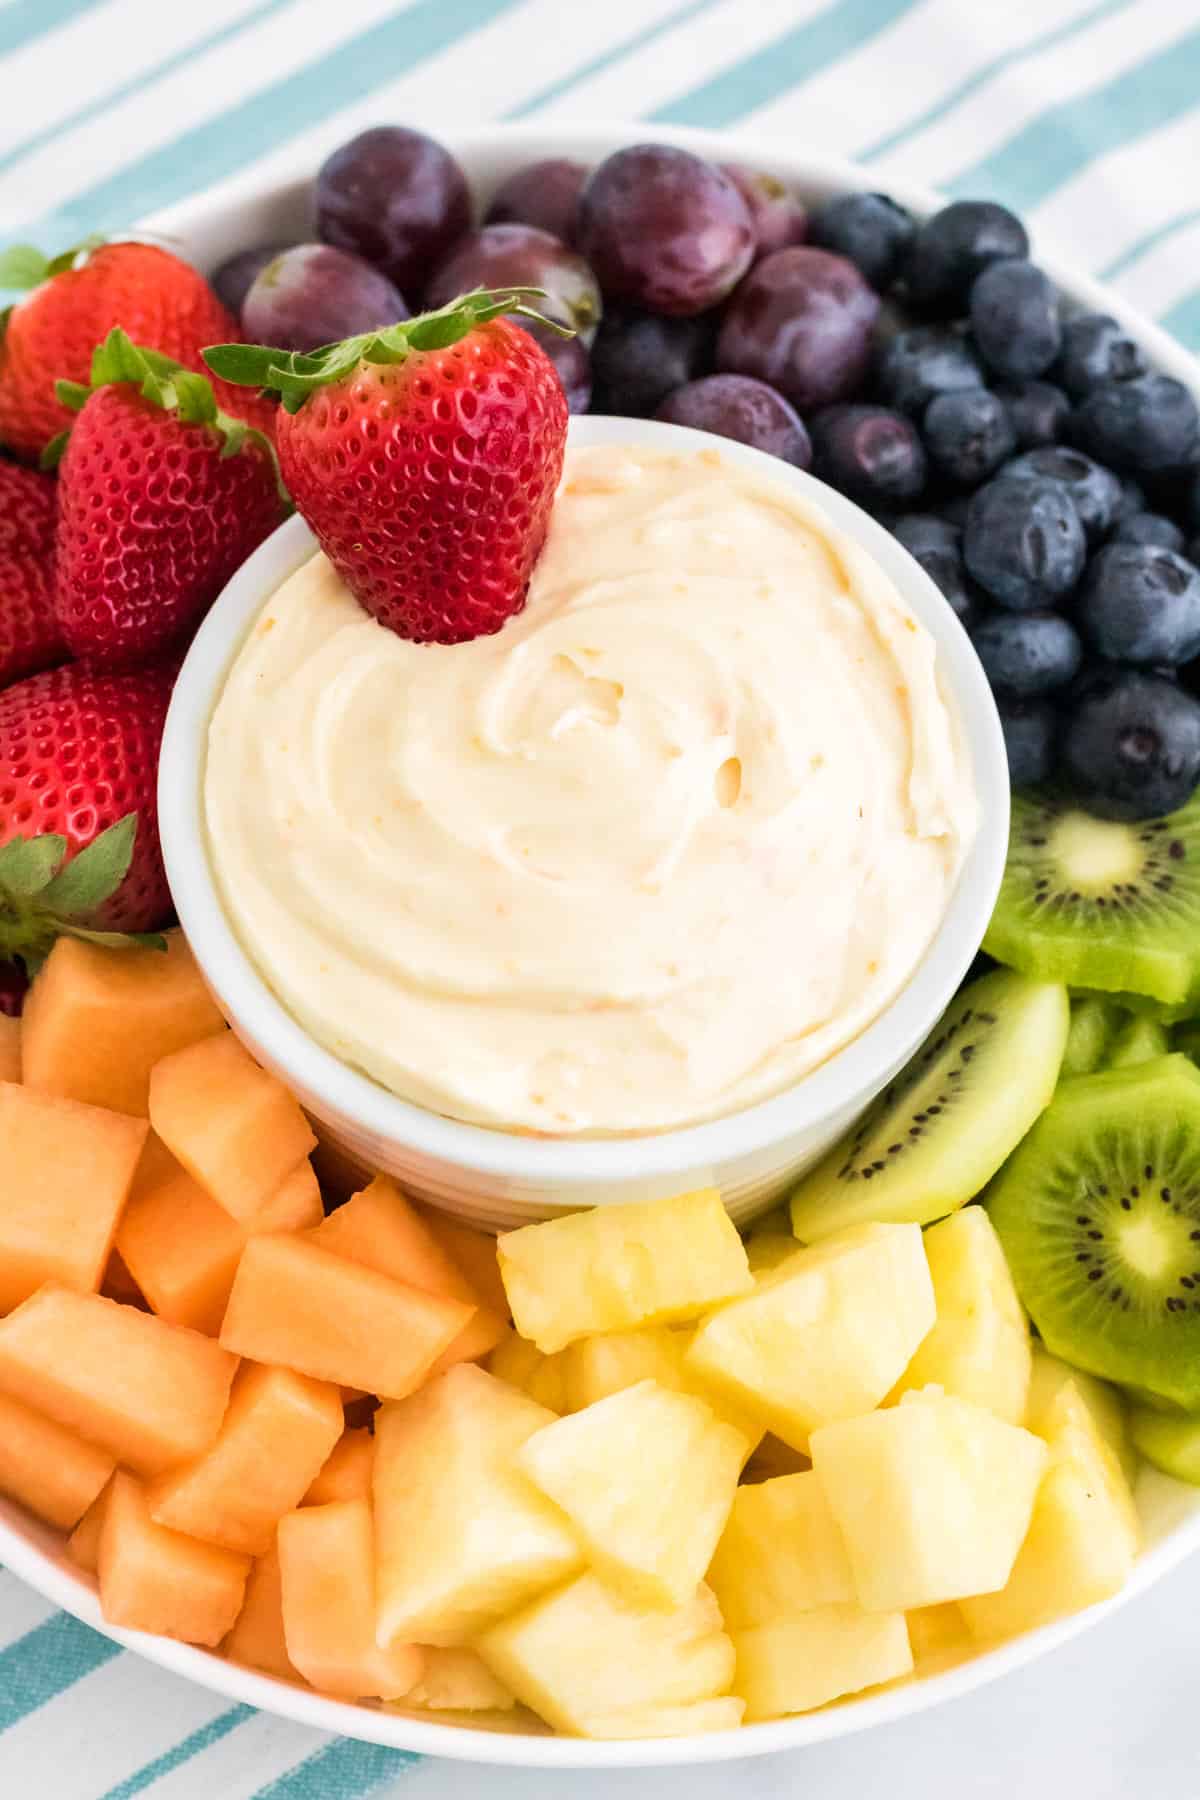 Fresh fruit and dip platter with strawberry sticking out of the orange fruit dip.